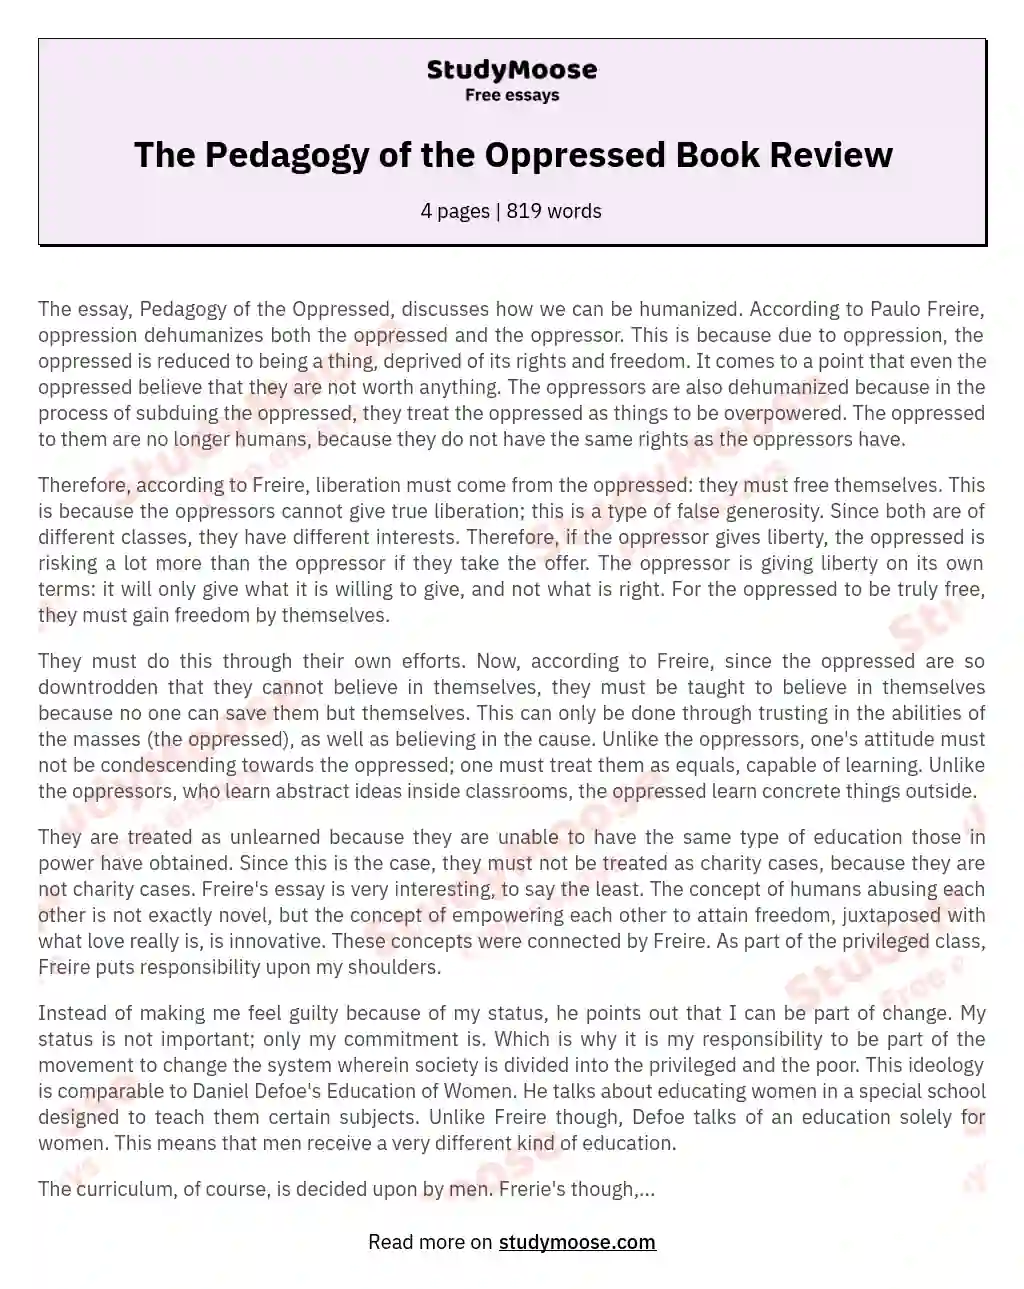 The Pedagogy of the Oppressed Book Review essay